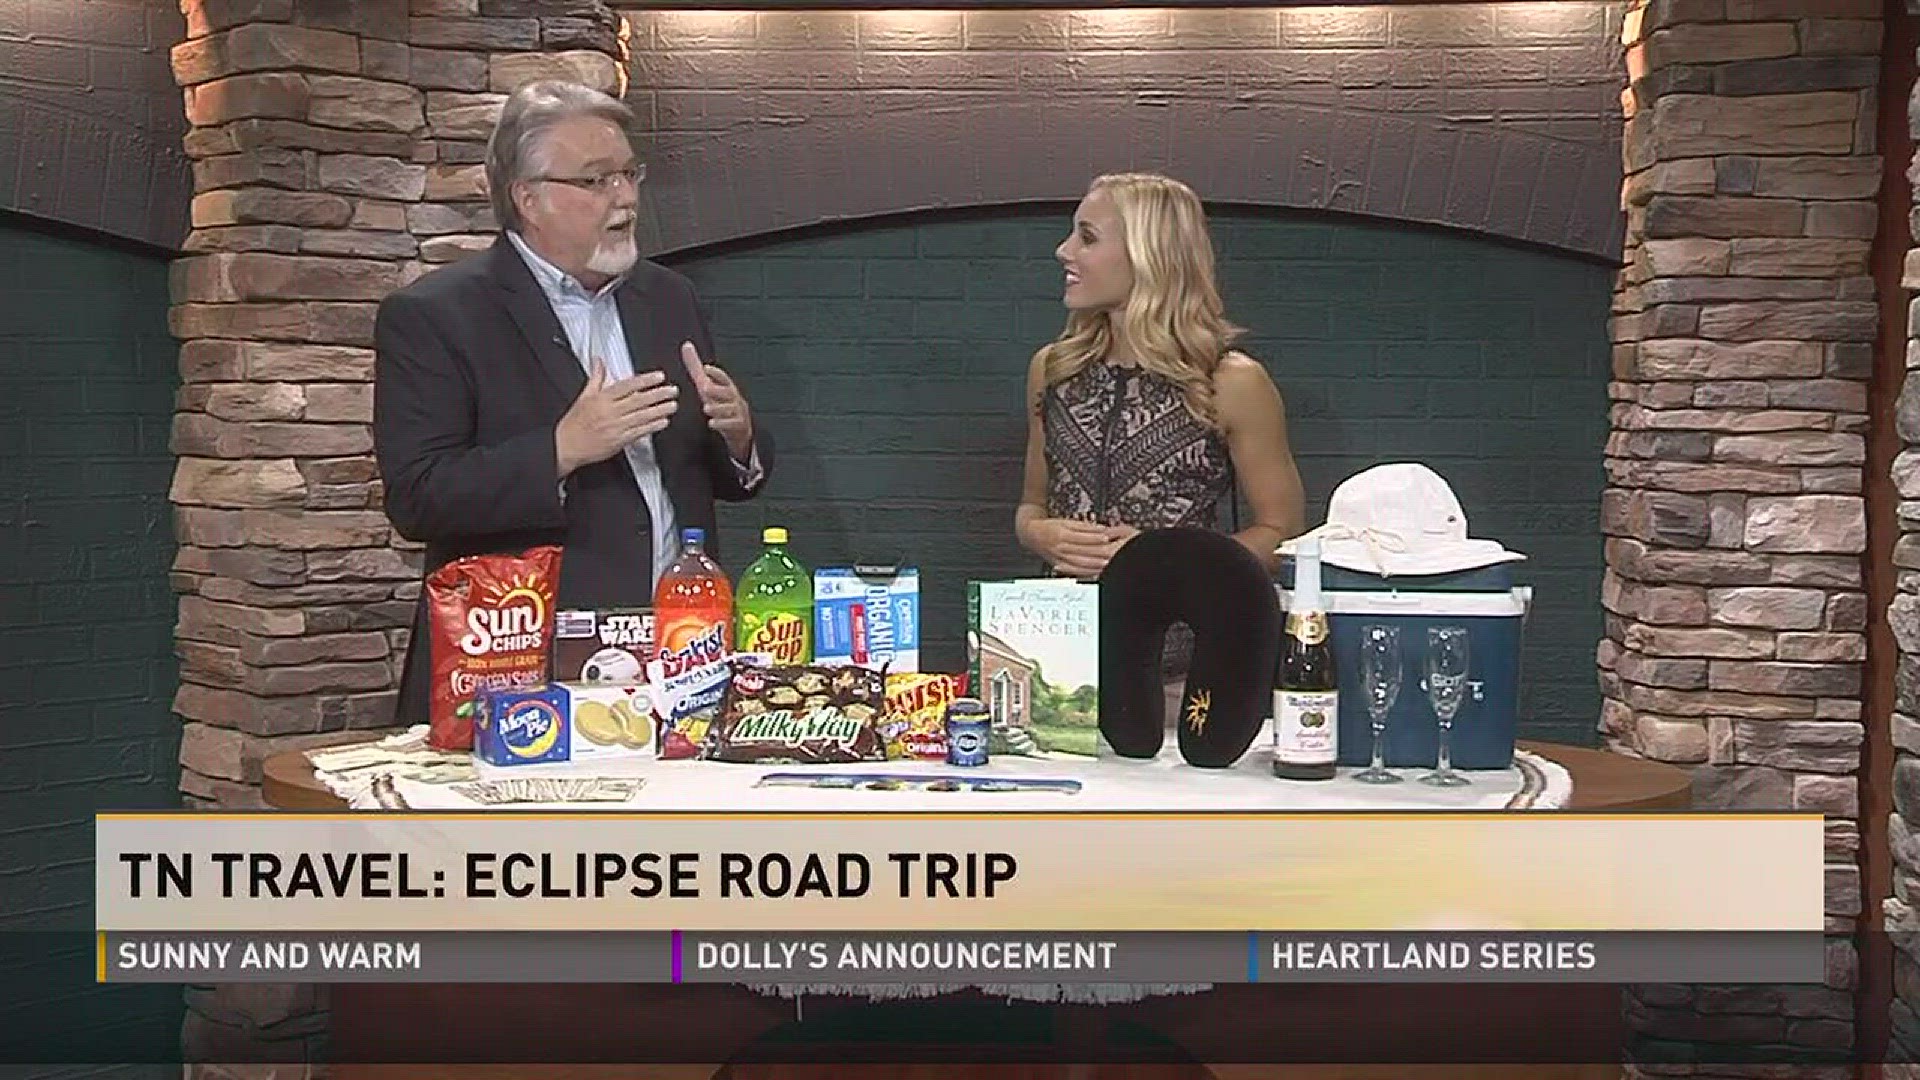 Dave shows us how to travel right for the eclipse.